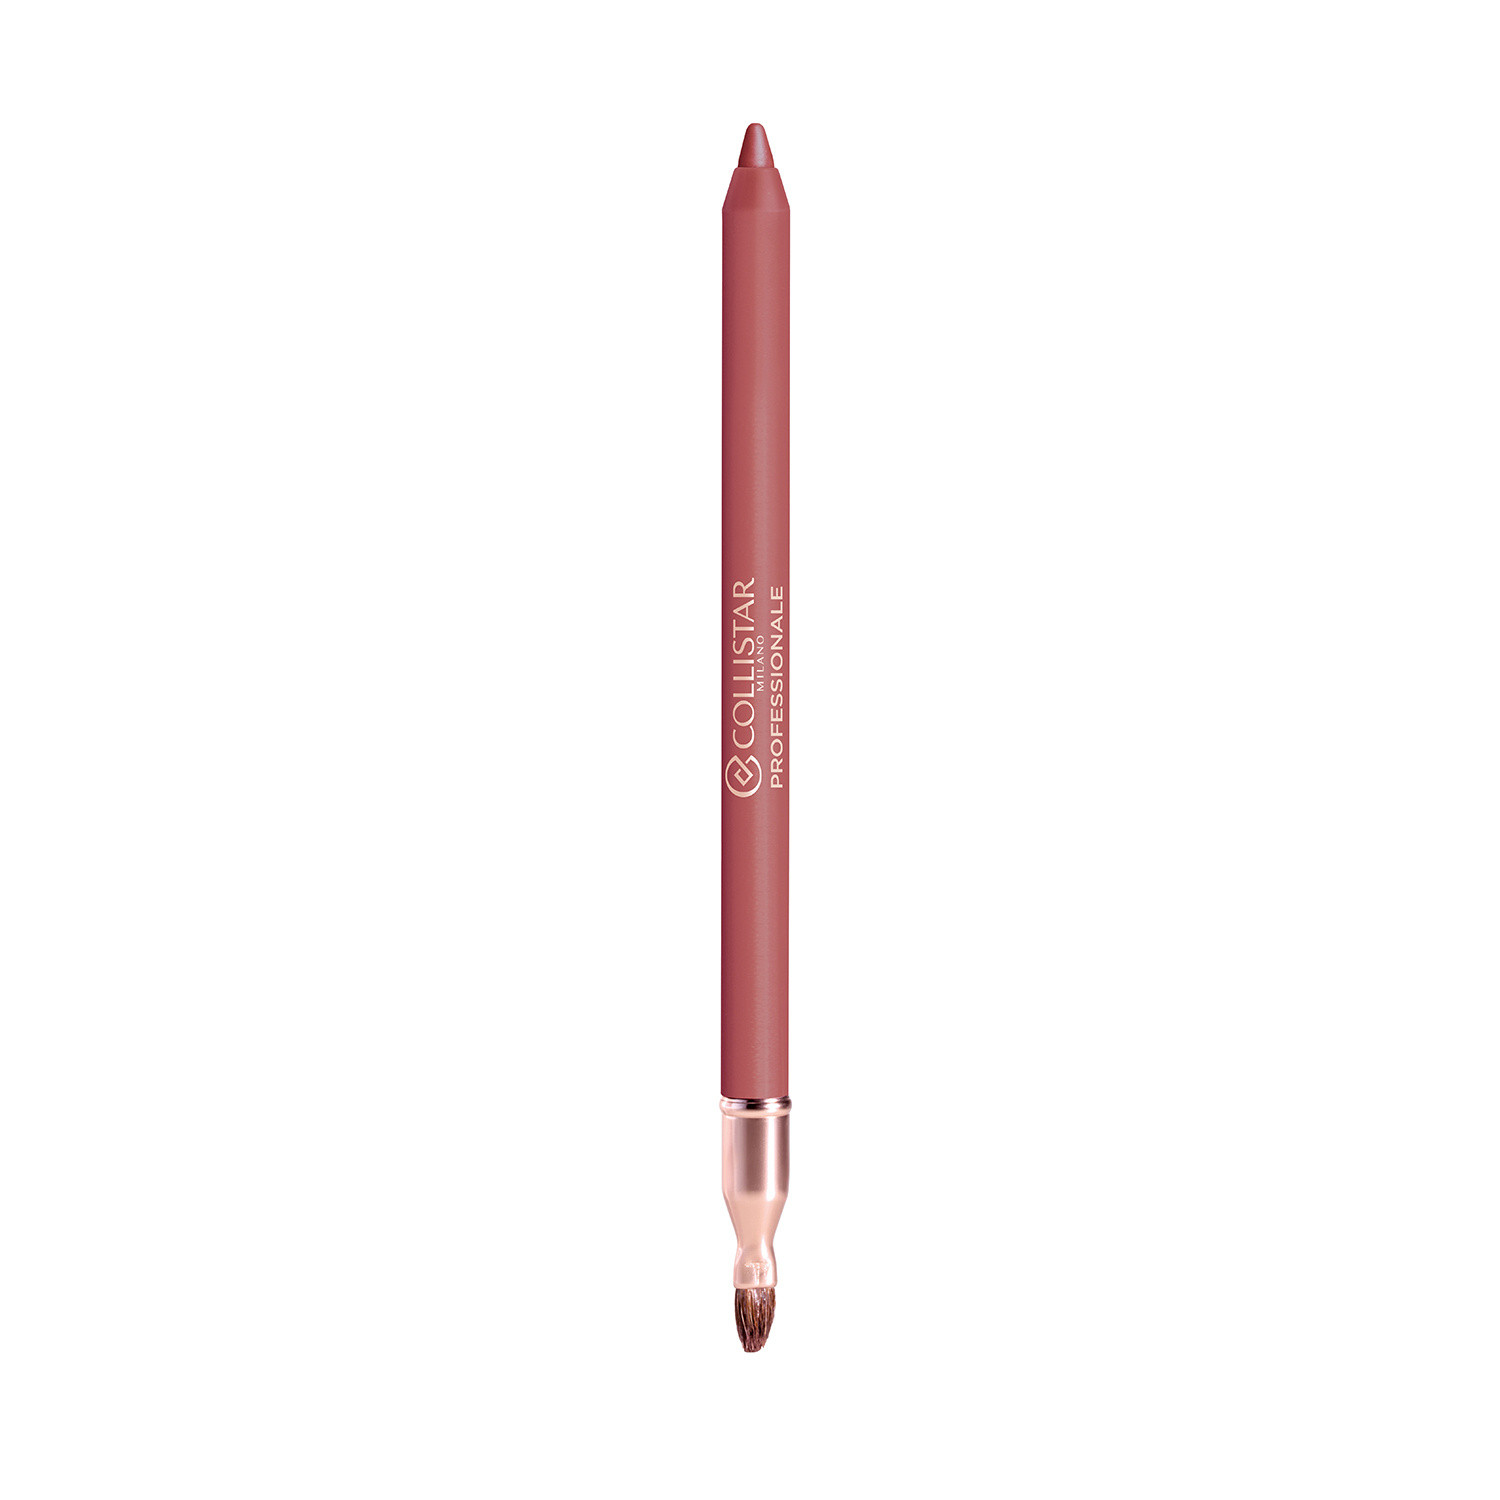 Collistar - Professional long lasting lip pencil - 13 Cameo, Powder Pink, large image number 1